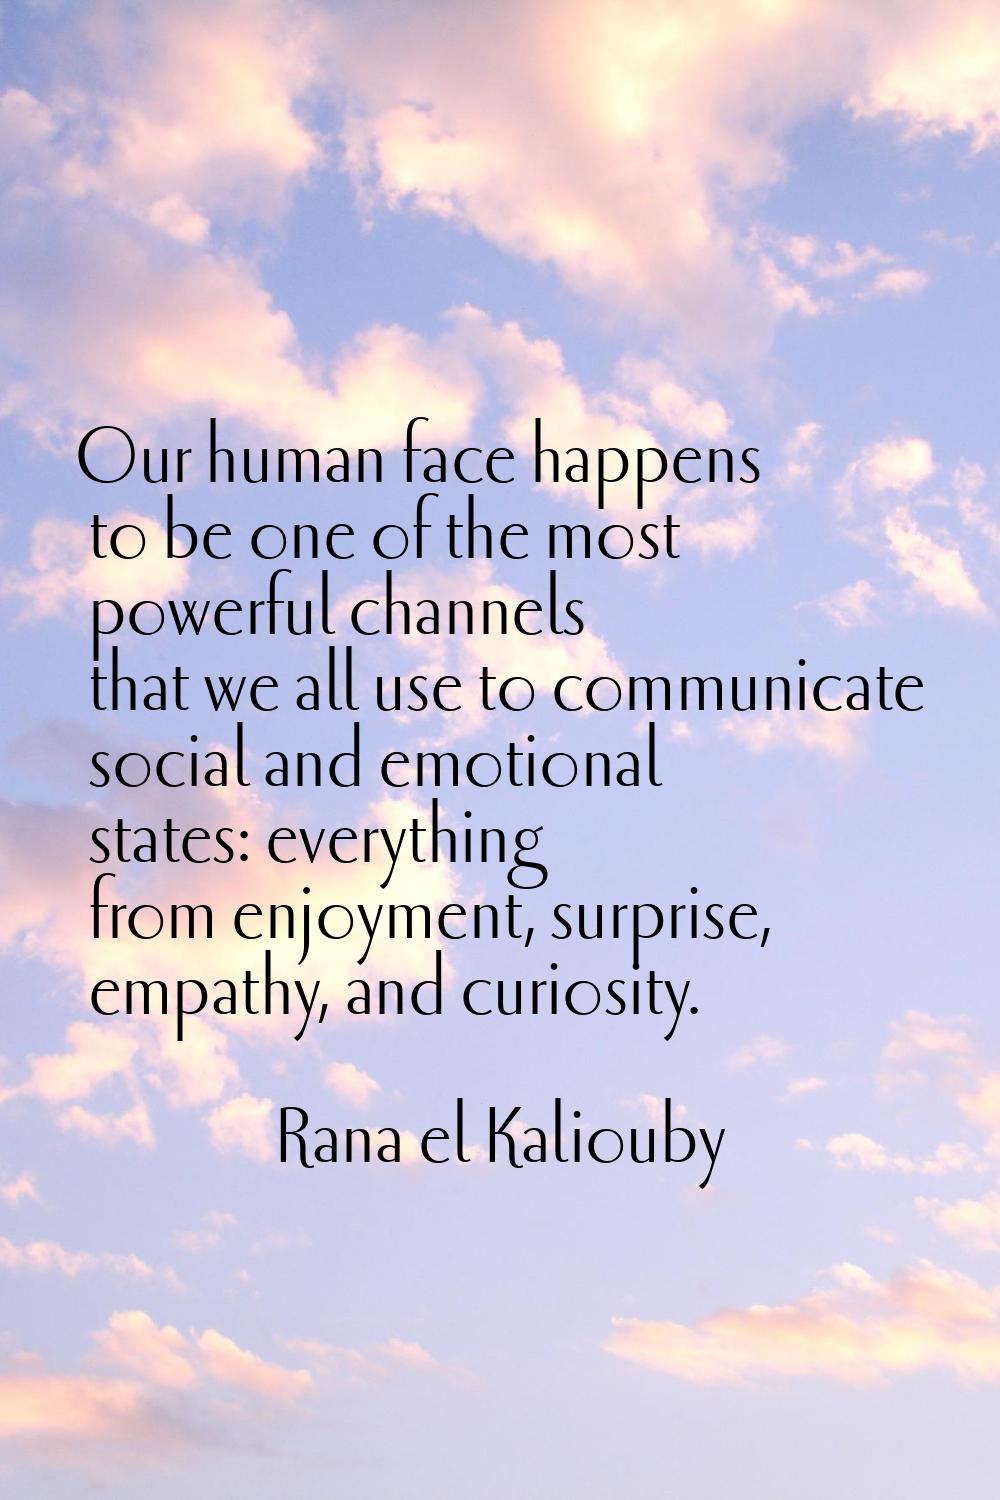 Our human face happens to be one of the most powerful channels that we all use to communicate socia